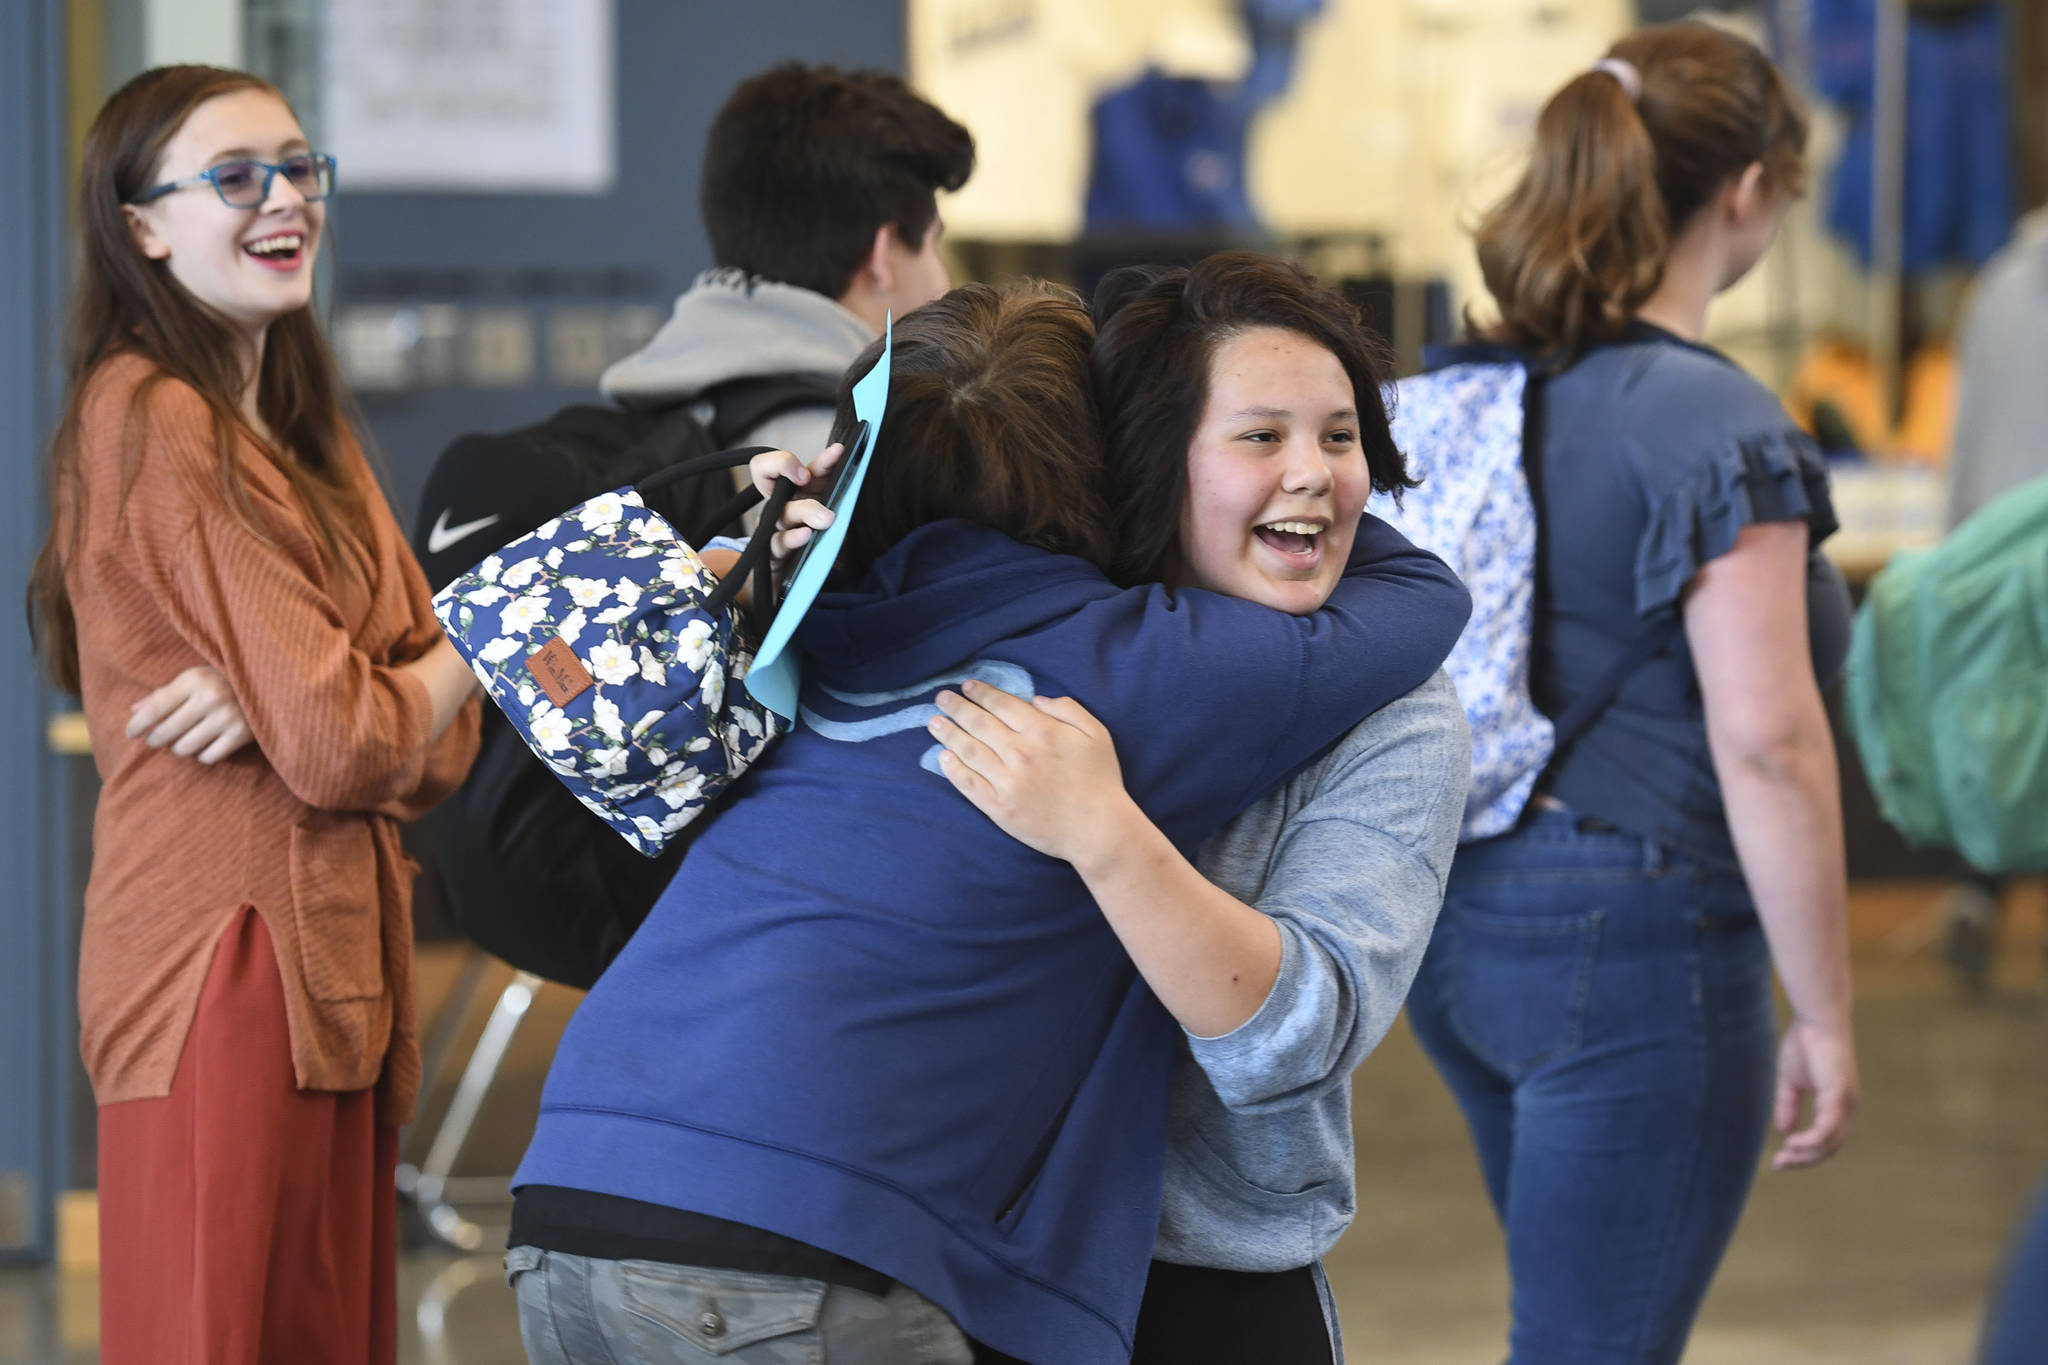 Freshman Jetta Hosiner, right, and Freshman Taren Wright hug as Freshman Kelsi Sell, left, looks on after arriving for the first day of school at Thunder Mountain High School on Monday, Aug. 19, 2019. (Michael Penn | Juneau Empire)